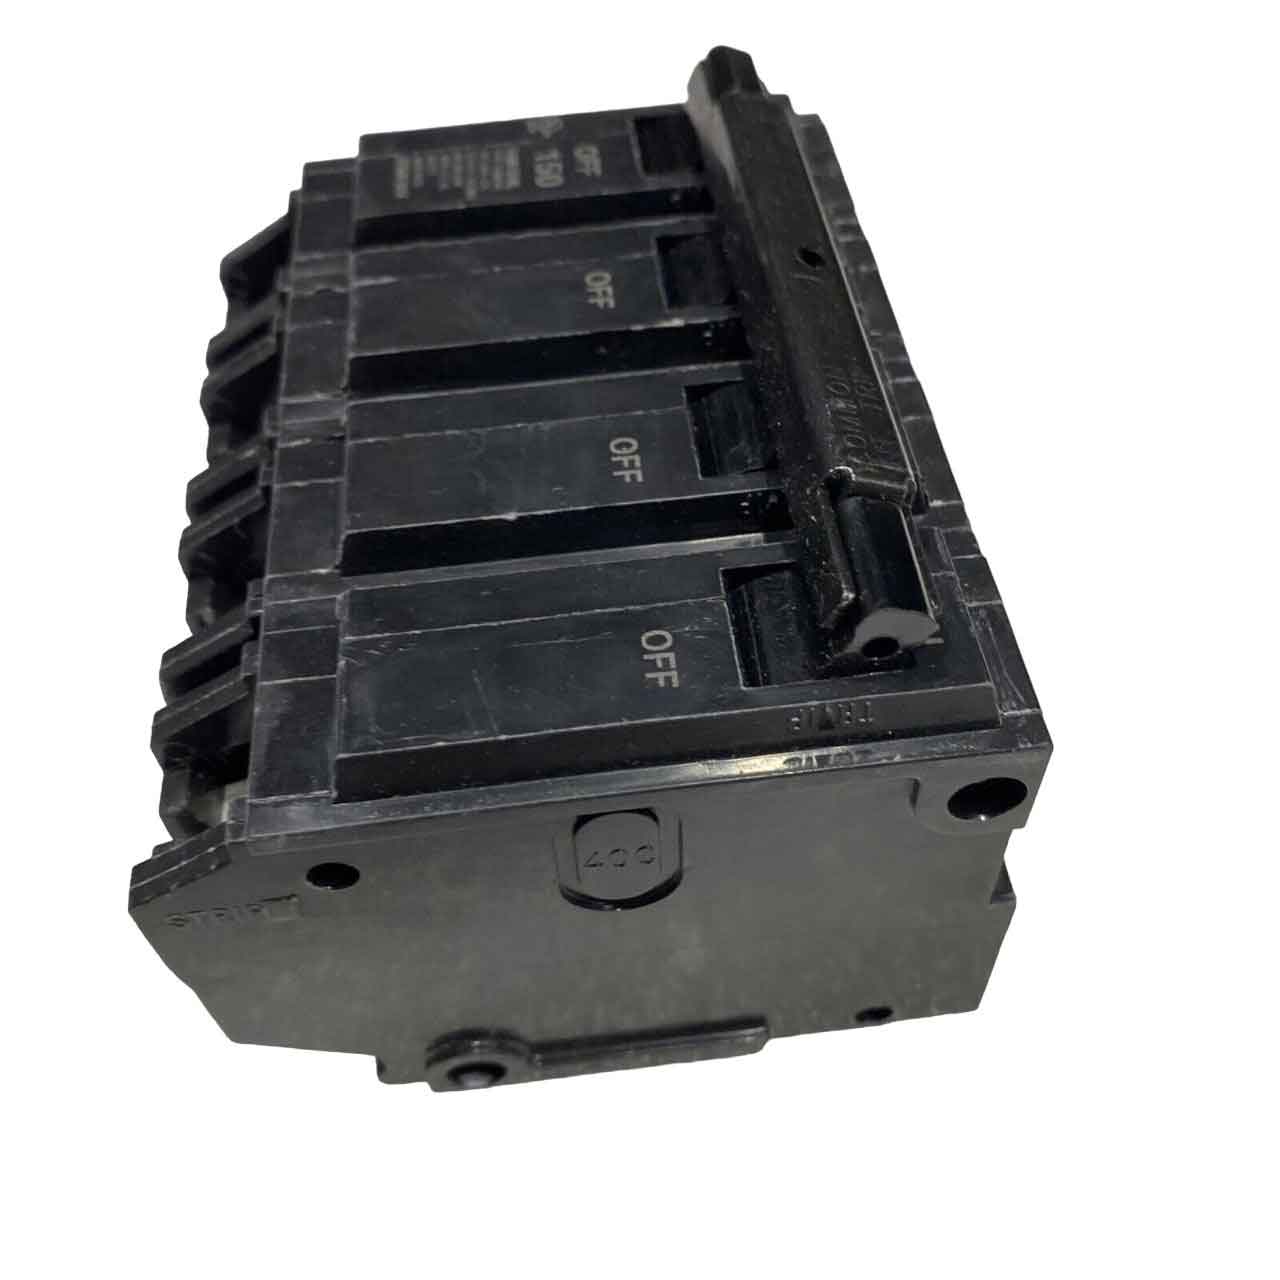 THQMV150WL - General Electrics - Molded Case Circuit Breakers